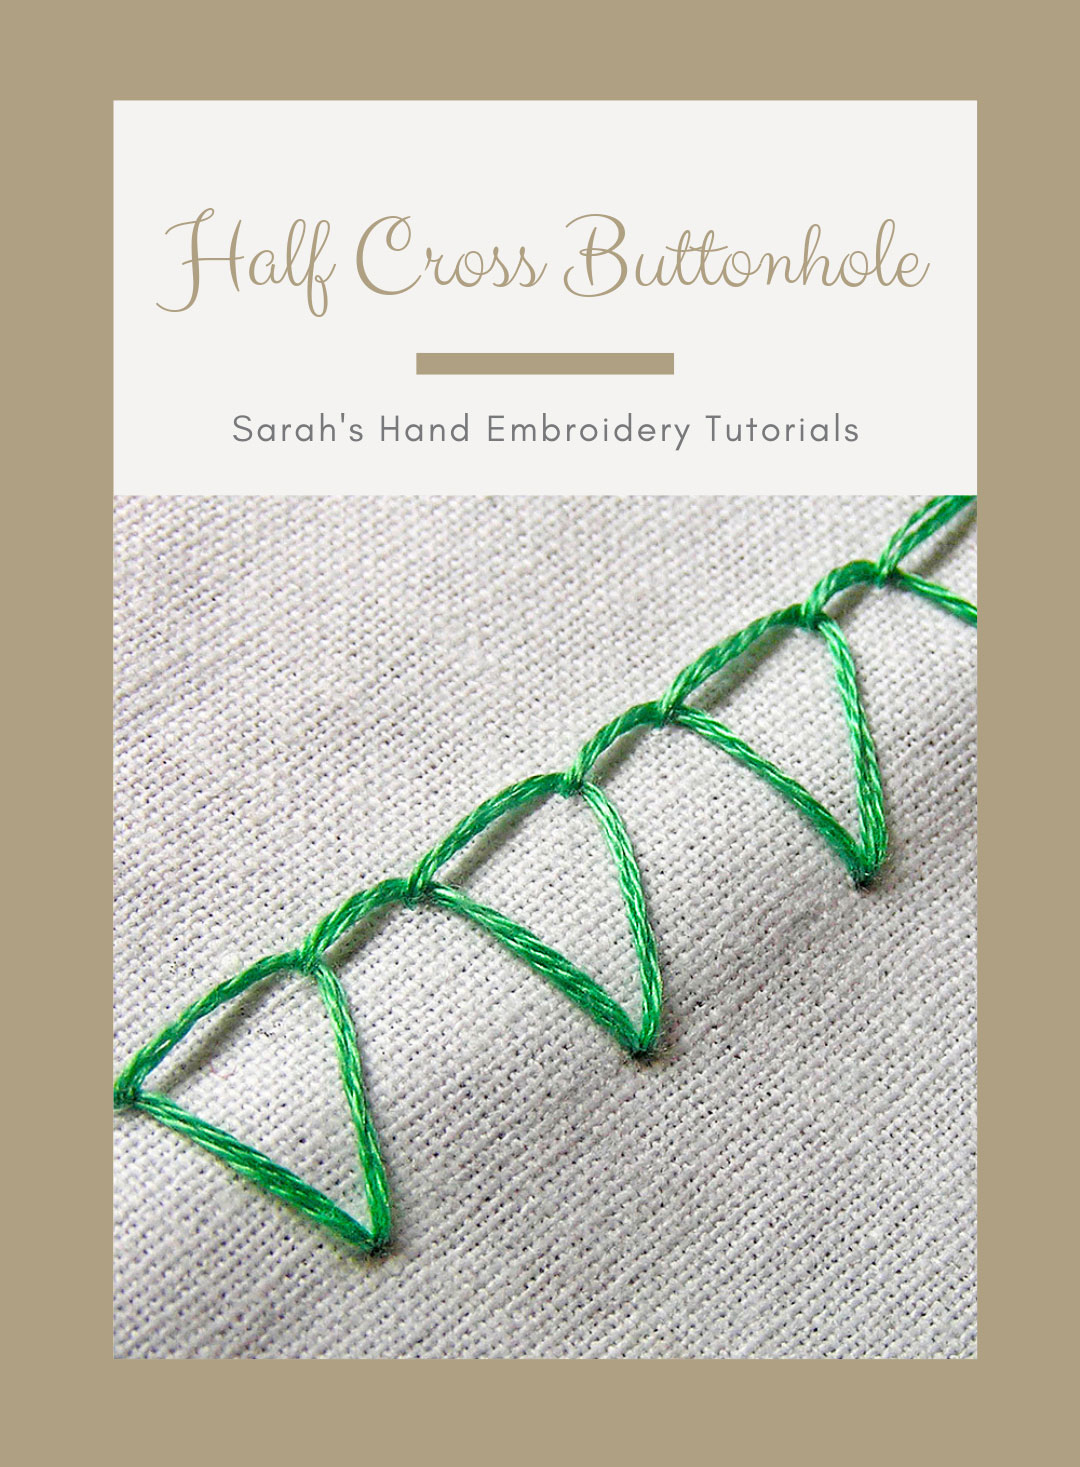 How To Do Closed Blanket Stitch Sarahs Hand Embroidery Tutorials